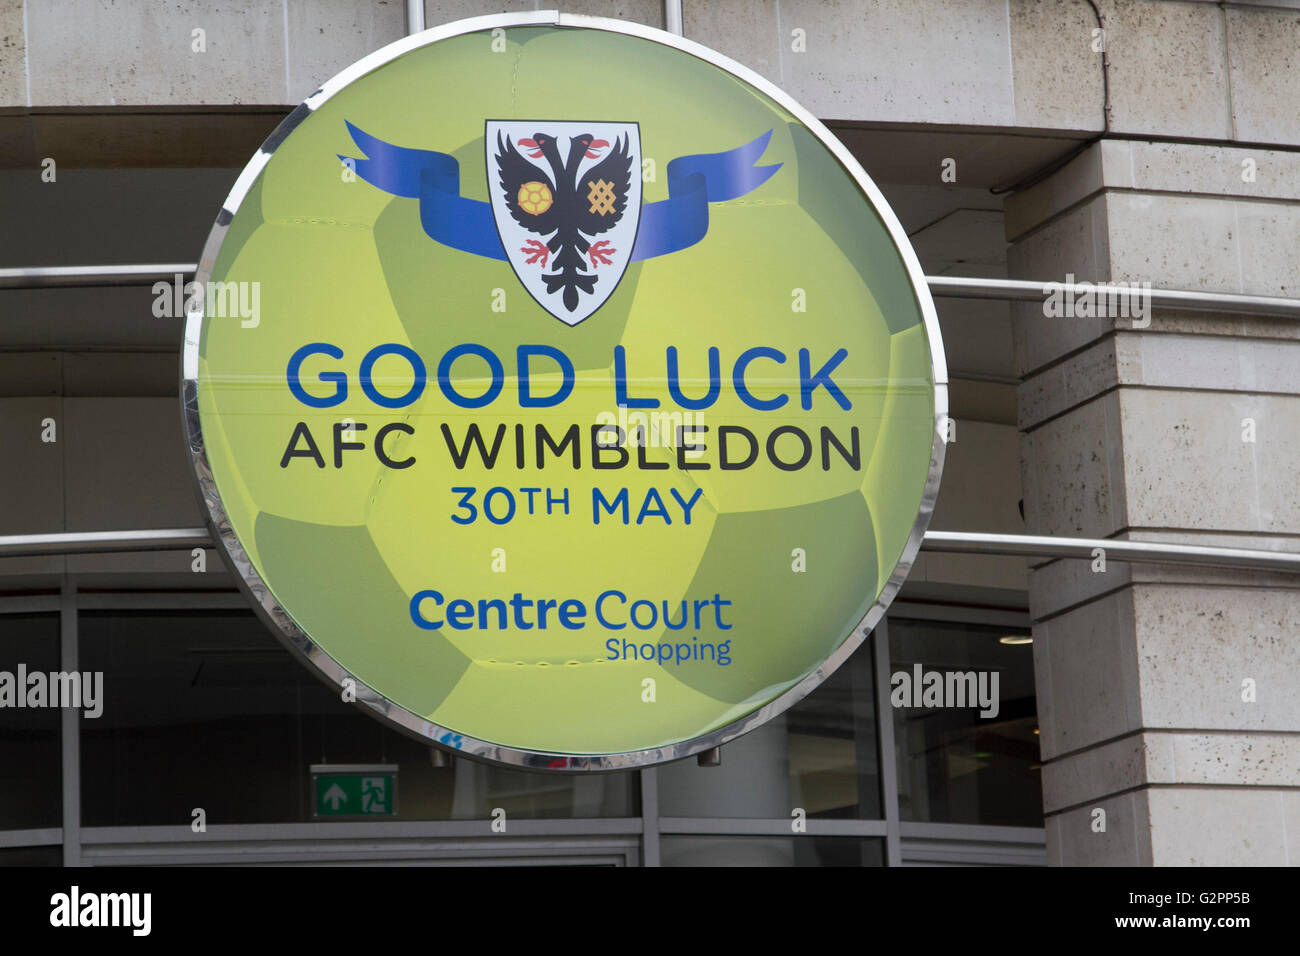 Wimbledon London, UK. 2nd June 2016. A large sign outside Centre Court shopping mall in Wimbledon town centre extending good luck wishes to AFC Wimbledon after gaining promotion to League One in a playoff final at Wembley stadium against Plymouth on 30th May for the first time in the club's history since it was founded in 2002 Credit:  amer ghazzal/Alamy Live News Stock Photo